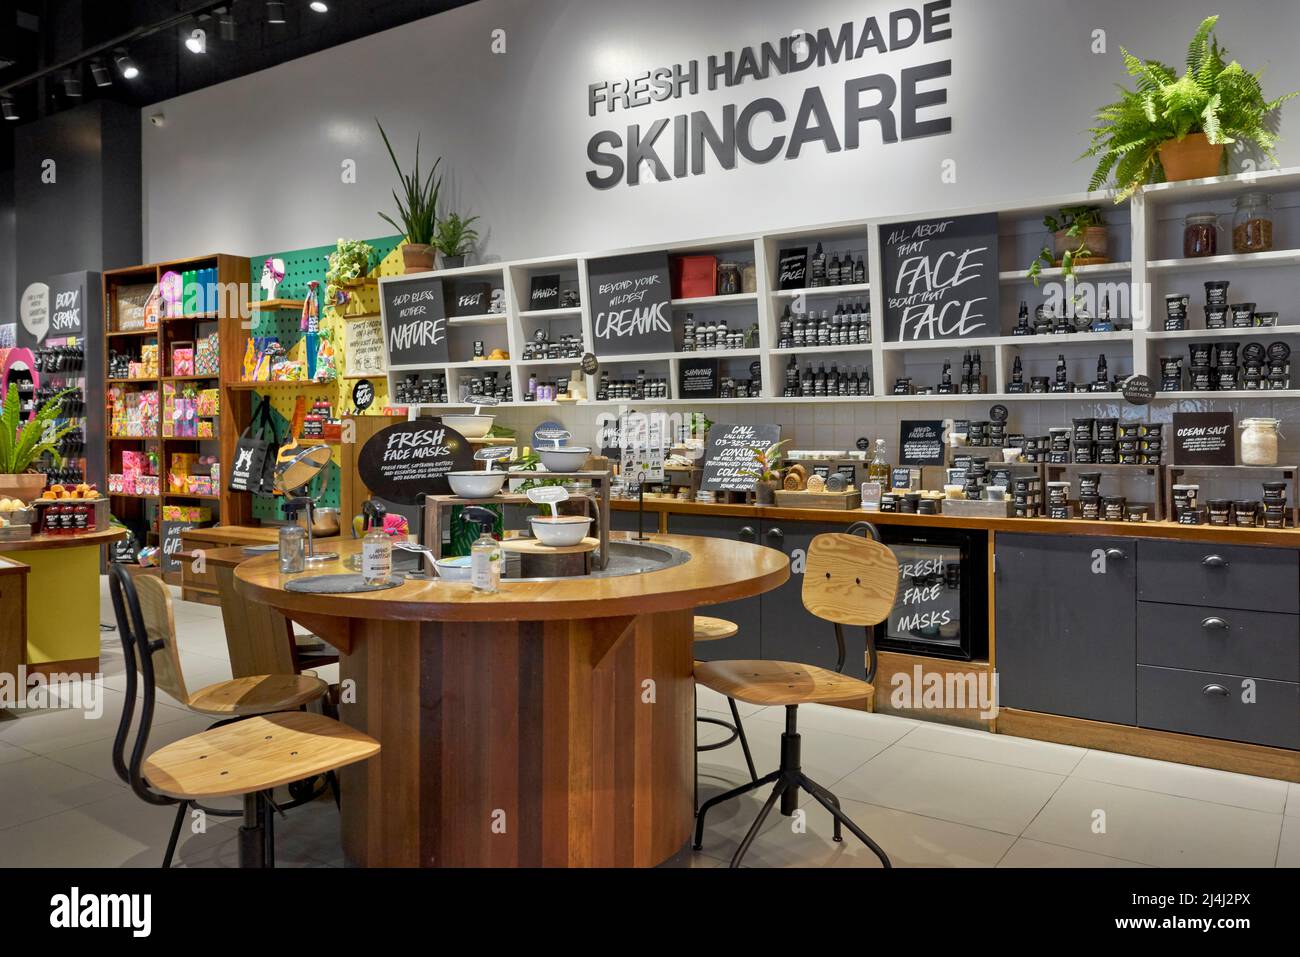 Skin care shop interior with products on display Stock Photo